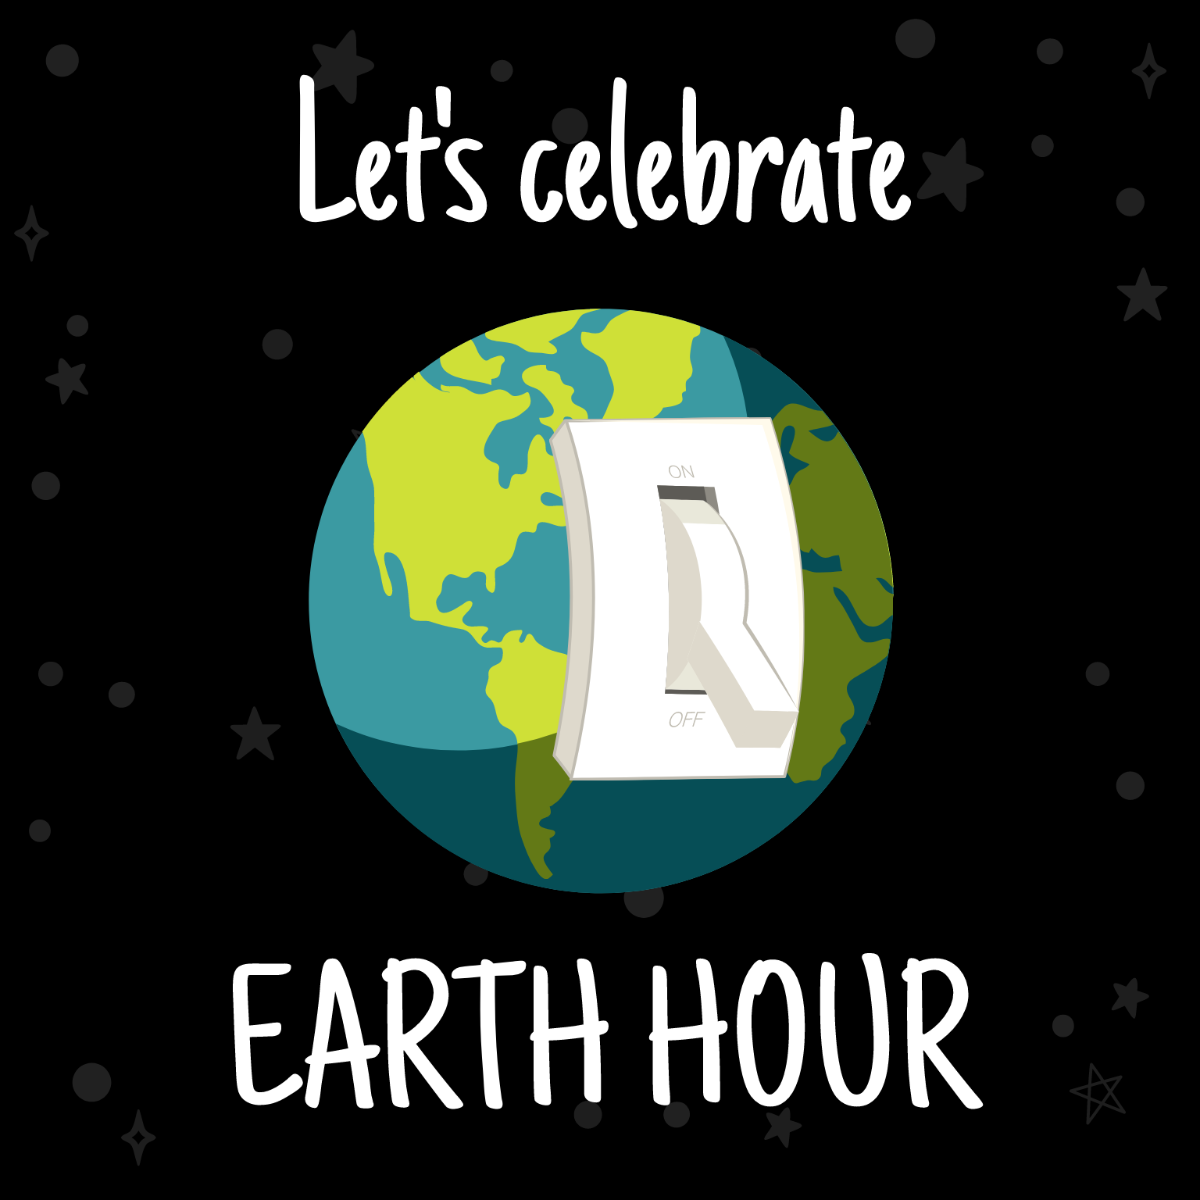 Free Earth Hour Celebration Vector Template